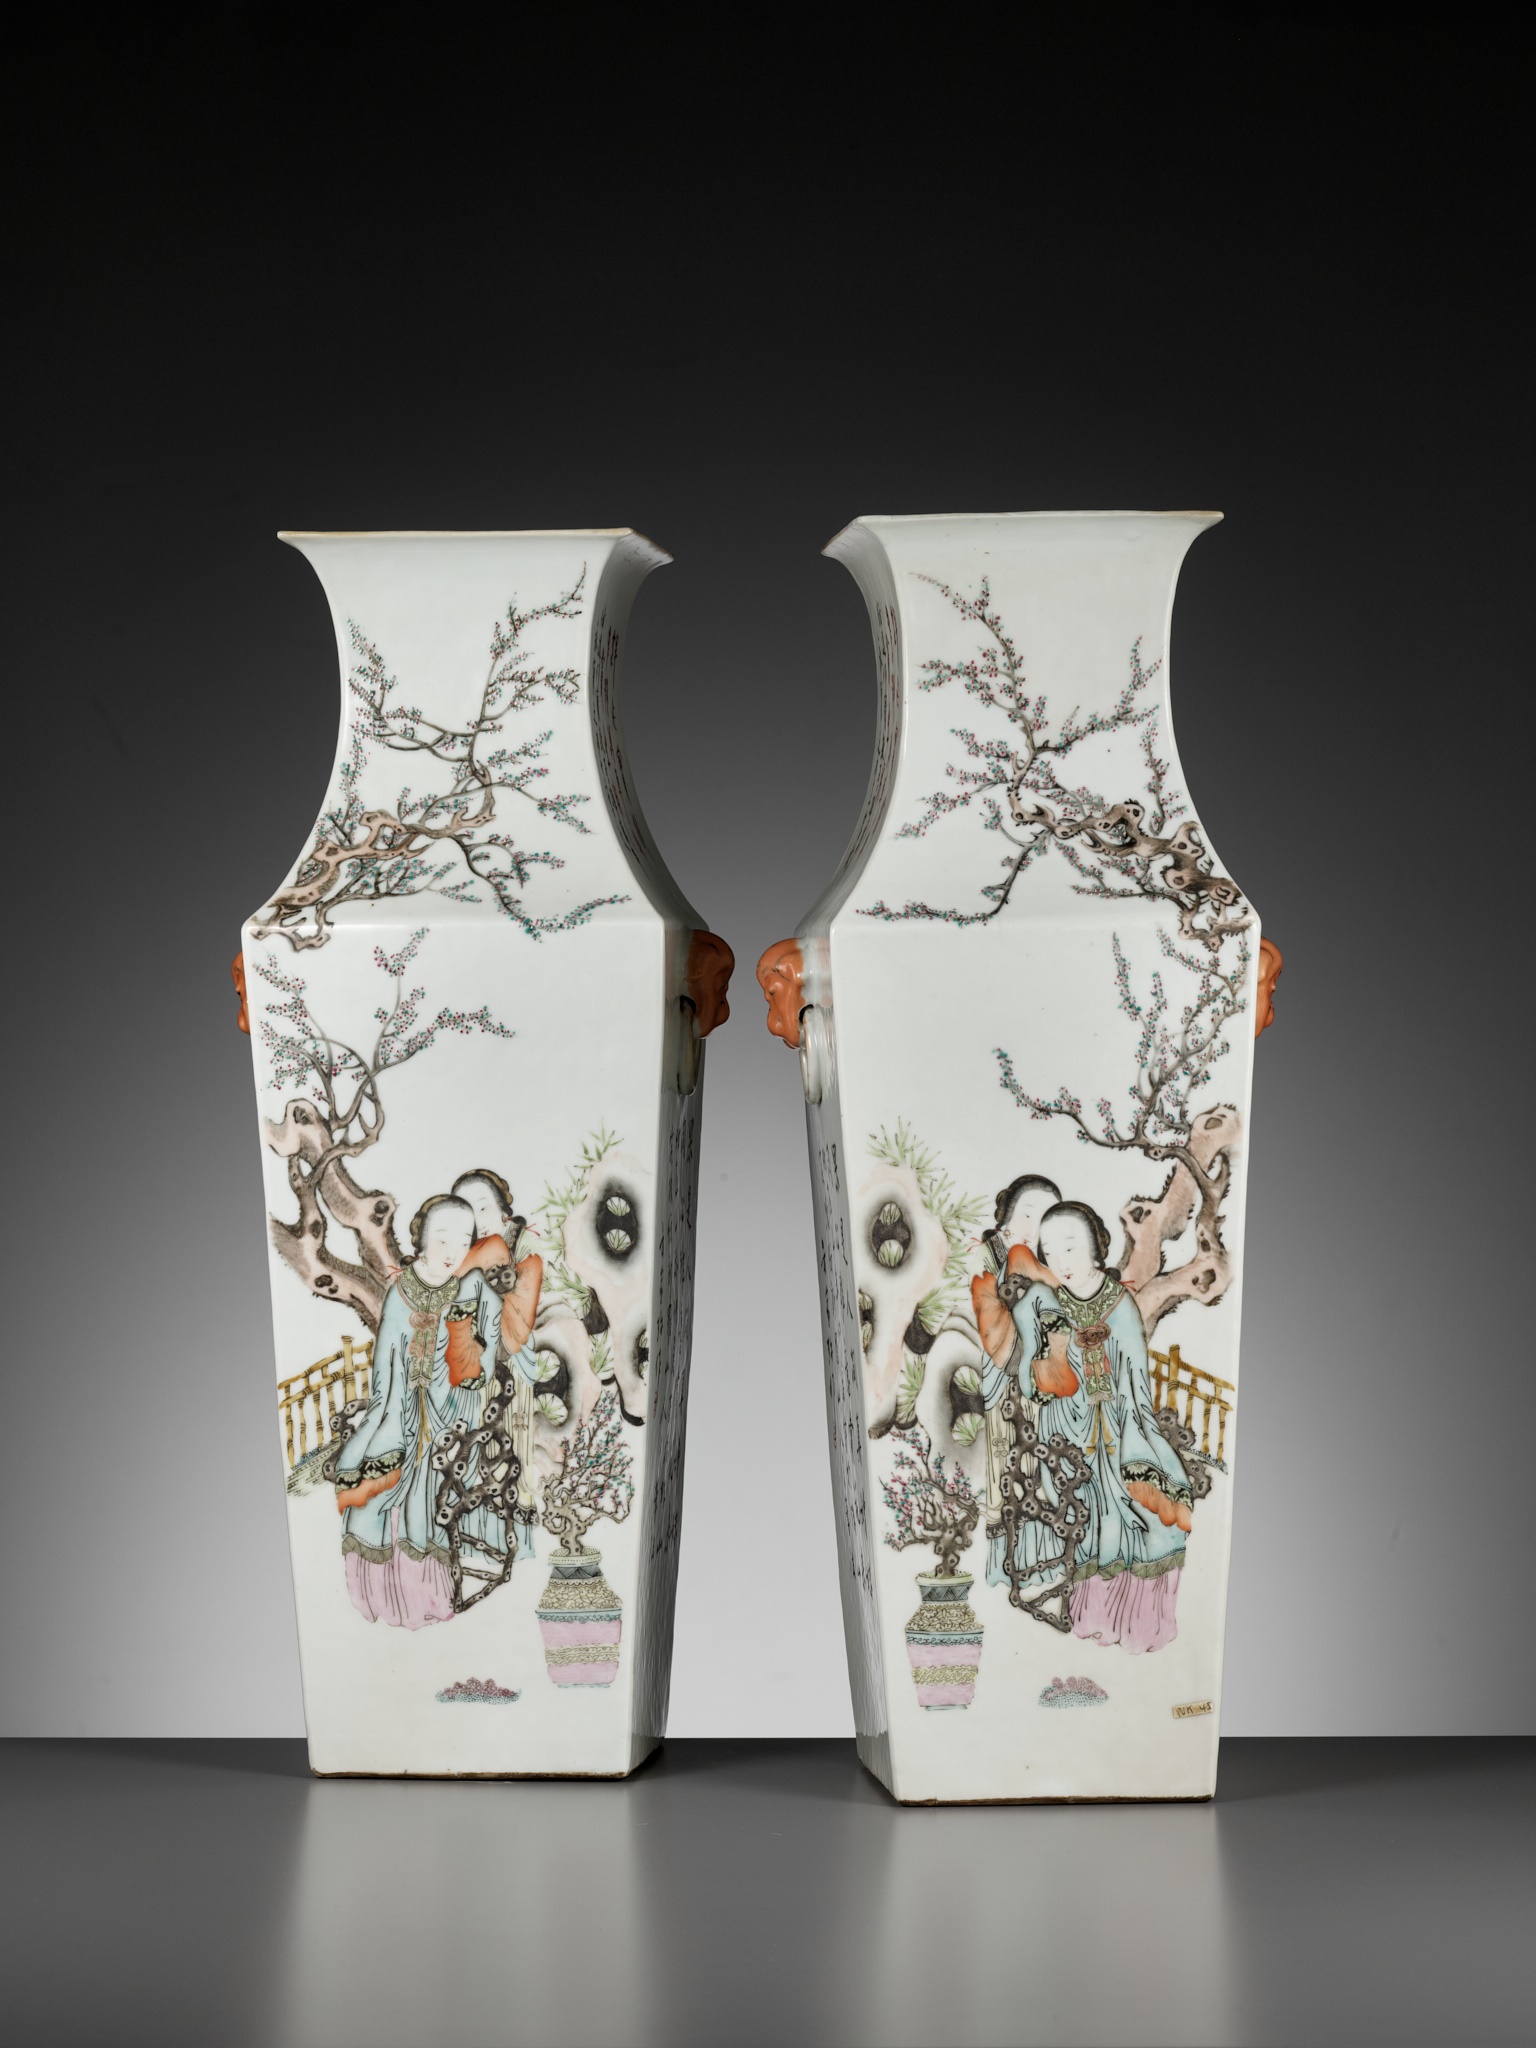 A PAIR OF LARGE QIANJIANG CAI VASES, BY FANG JIAZHEN, CHINA, DATED 1895 - Image 15 of 17